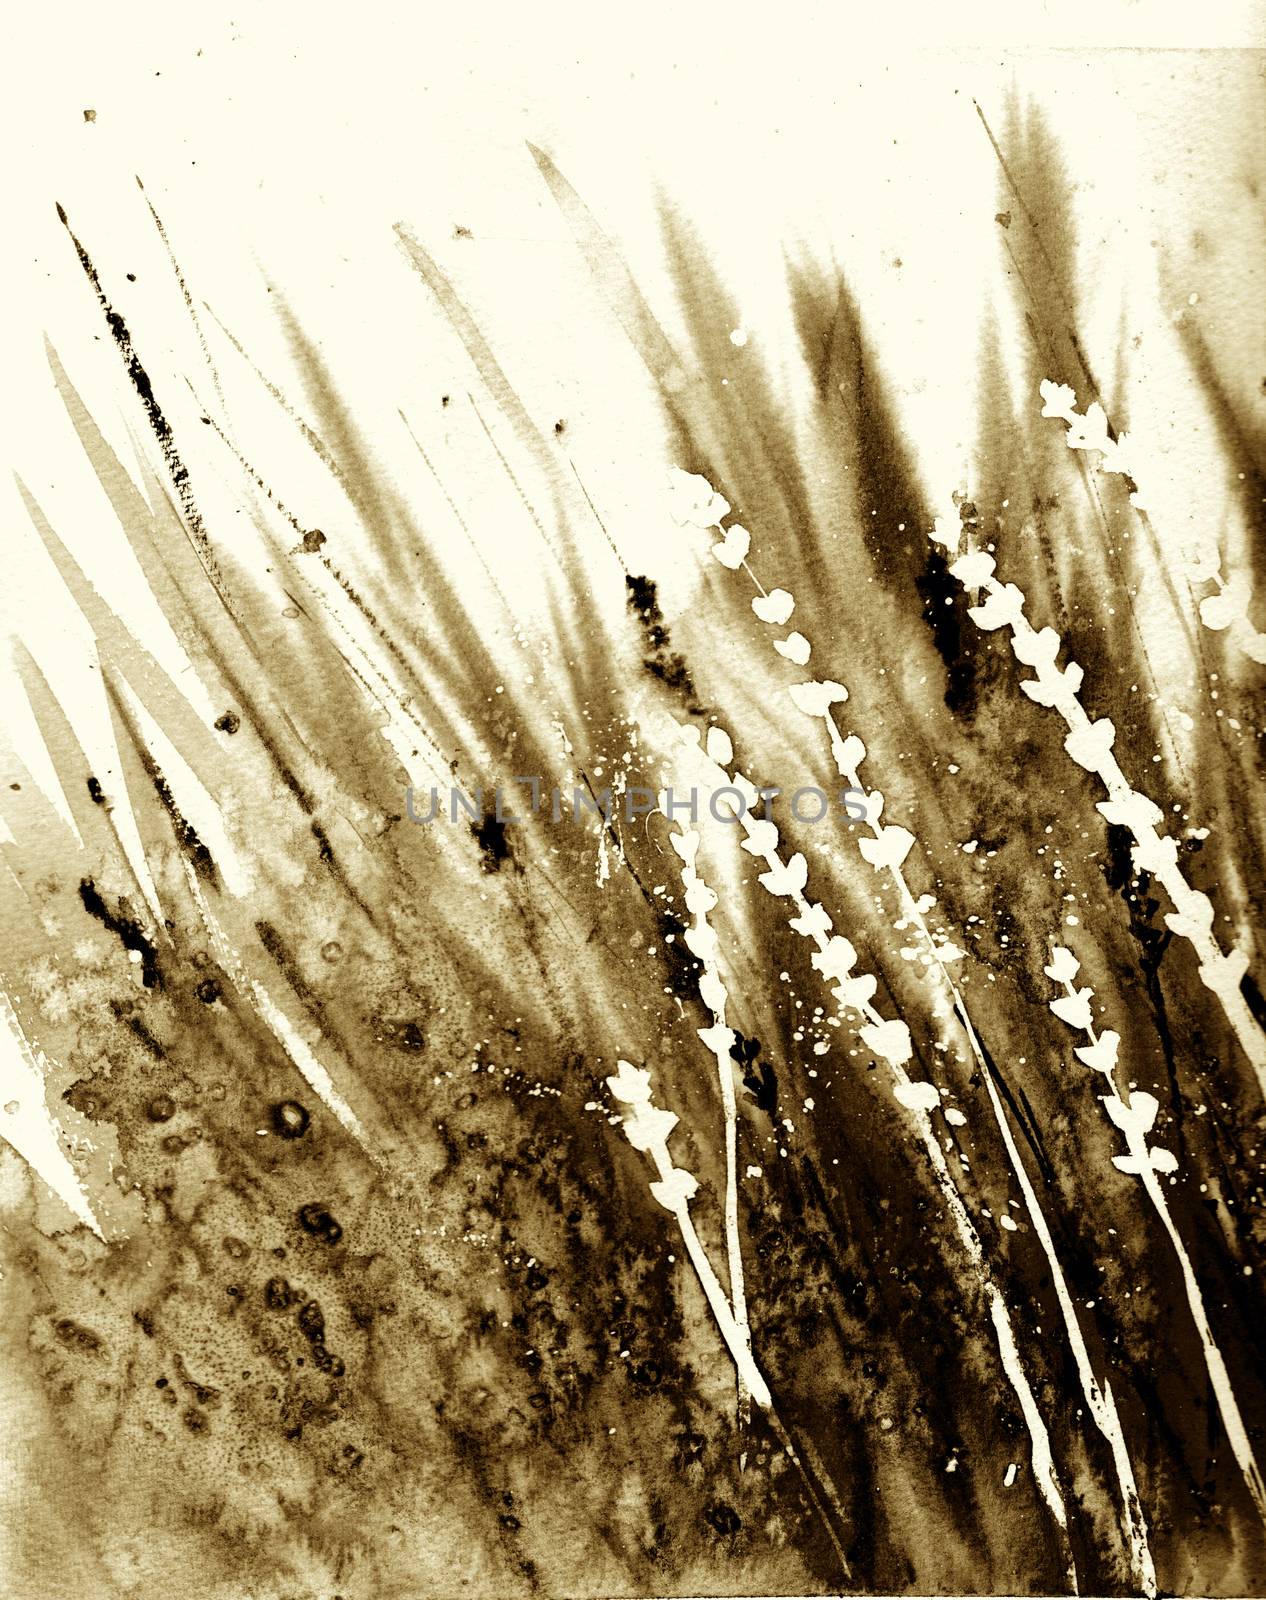 Abstract grass in the wind. Brown sepia colors. Monochrome background. by sshisshka